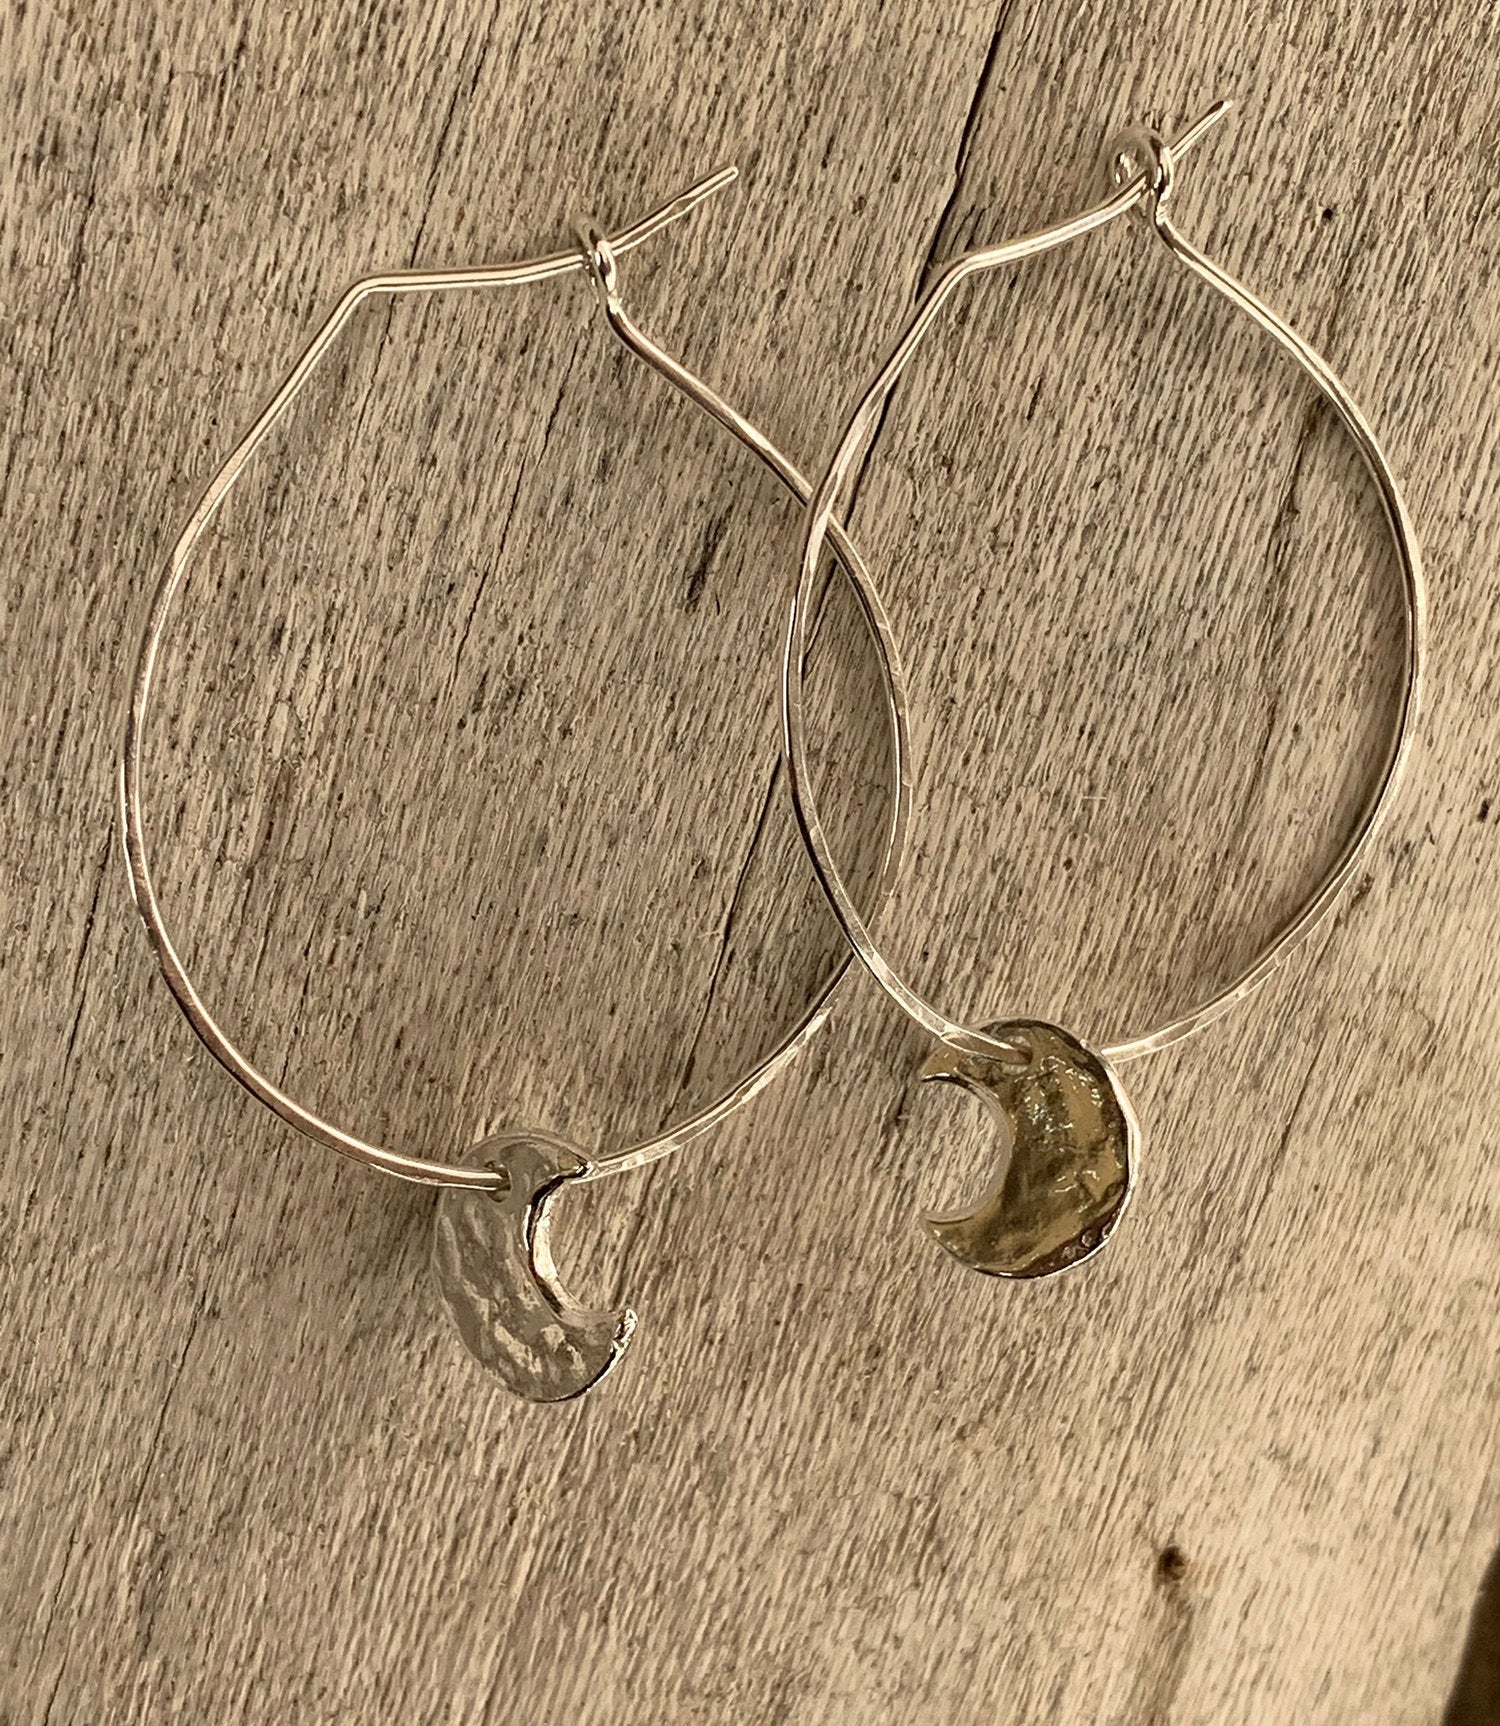 Handmade Sterling Silver Hoop Earrings with Silver Crescent Moons